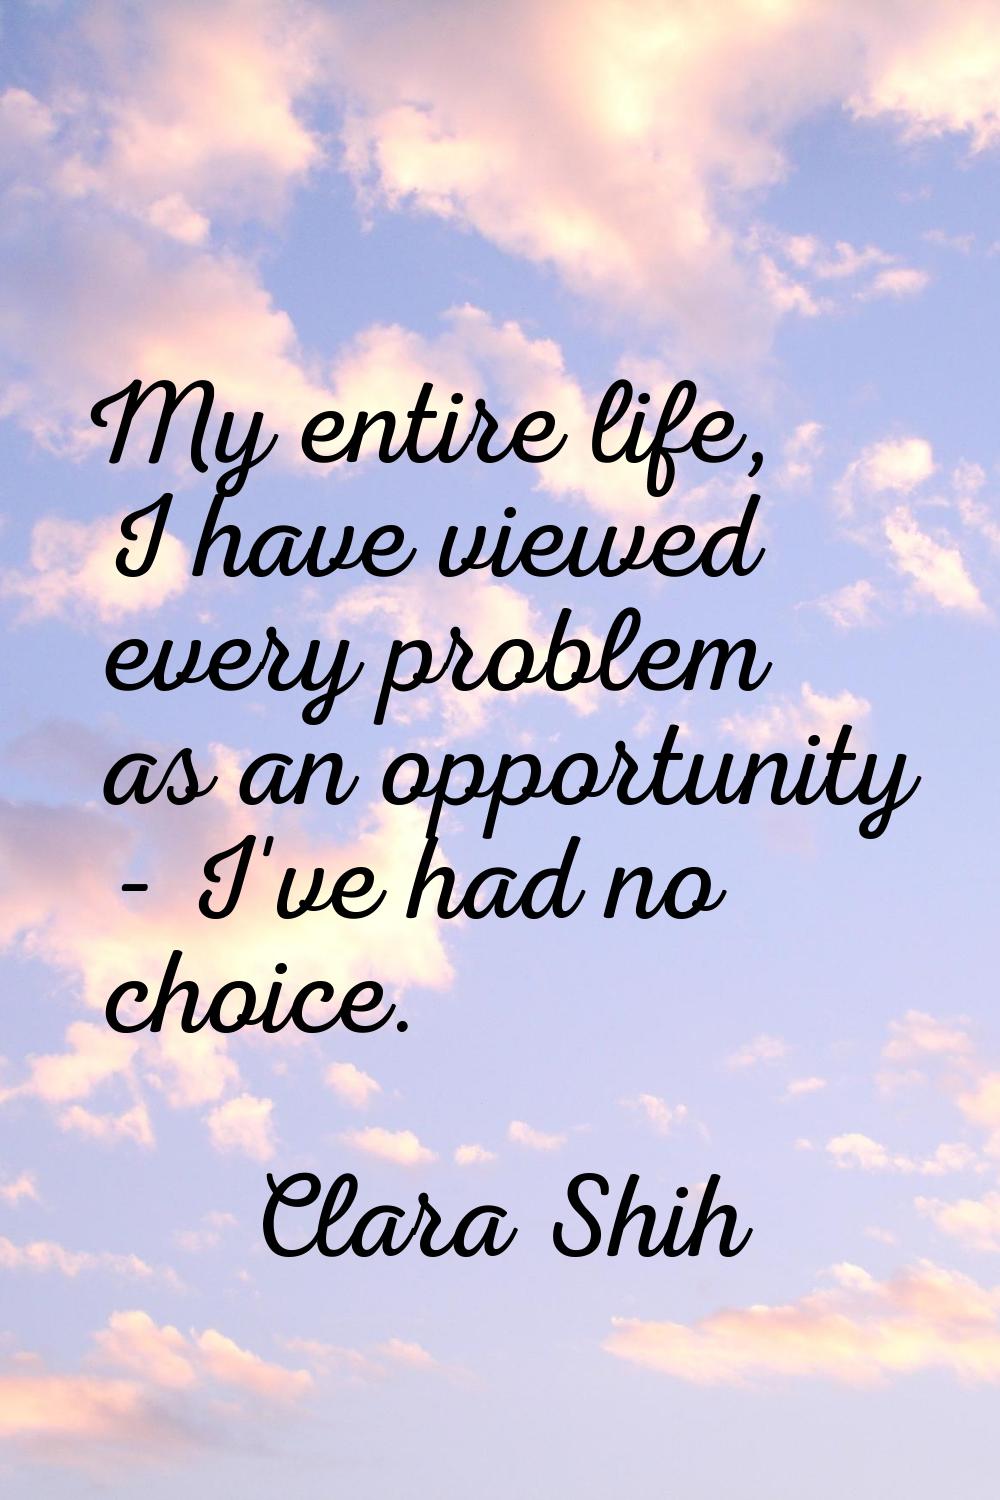 My entire life, I have viewed every problem as an opportunity - I've had no choice.